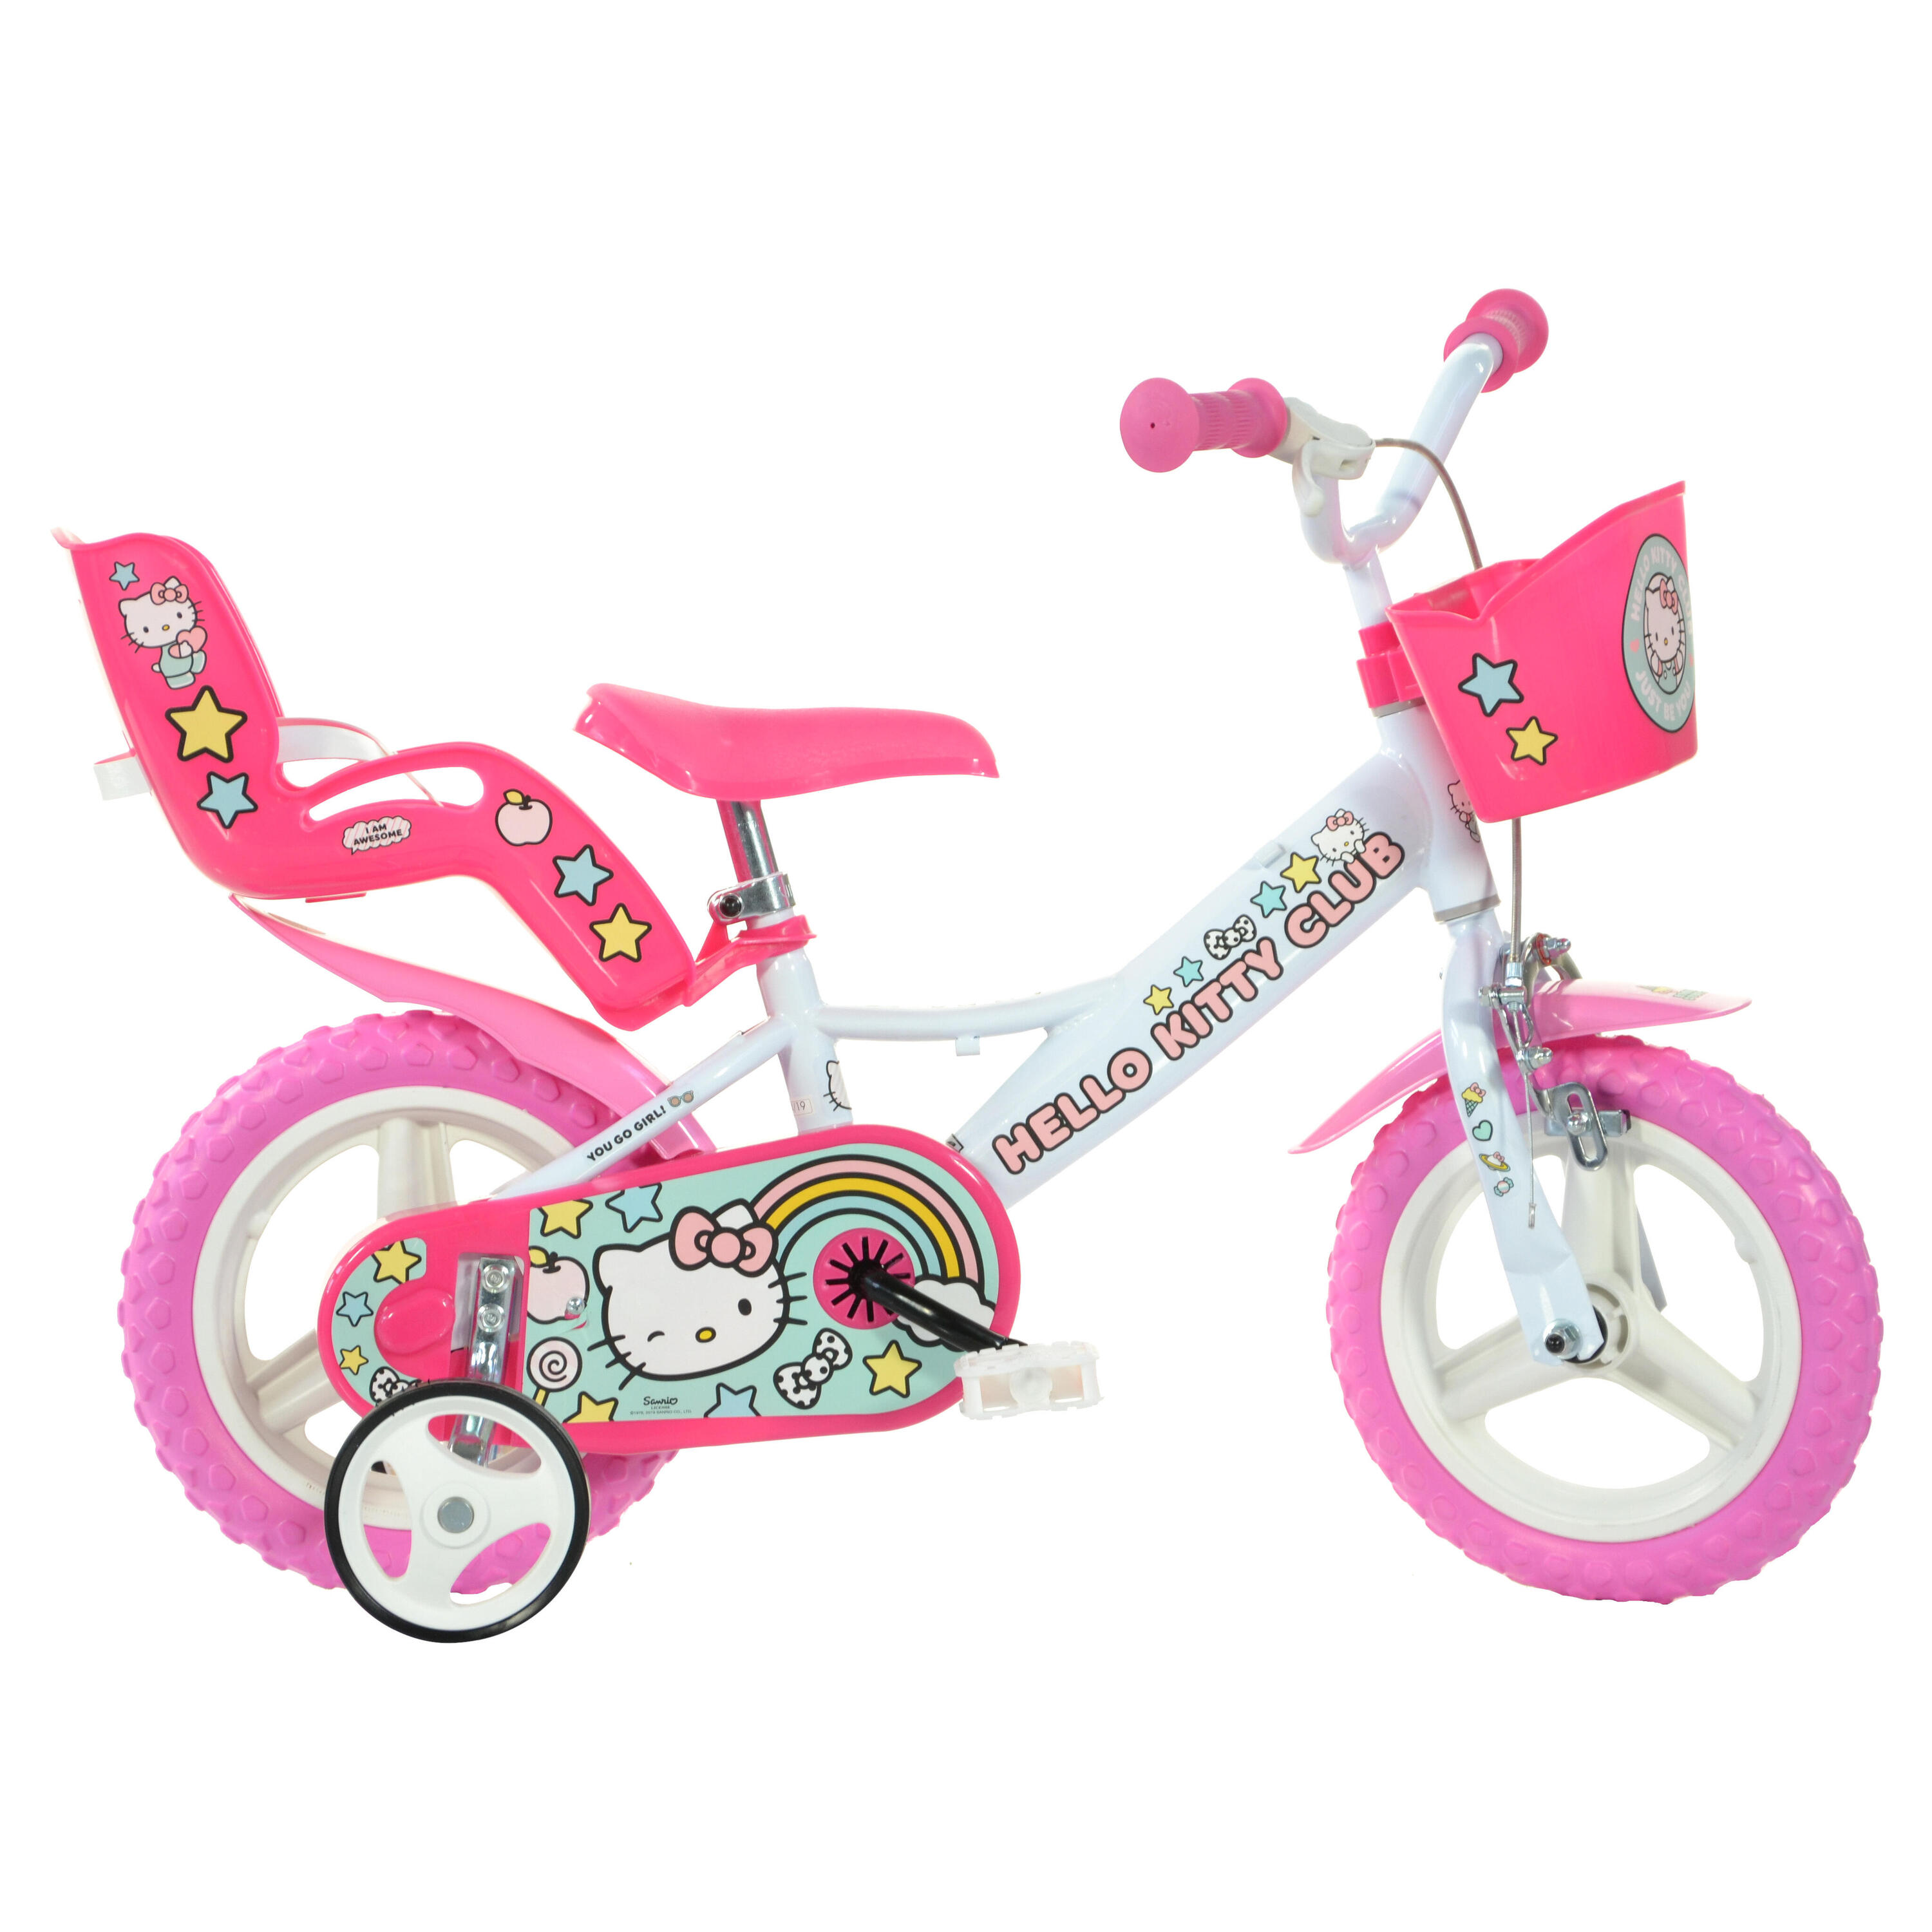 Hello Kitty 12" Bikes with Removable Stabilisers 1/4